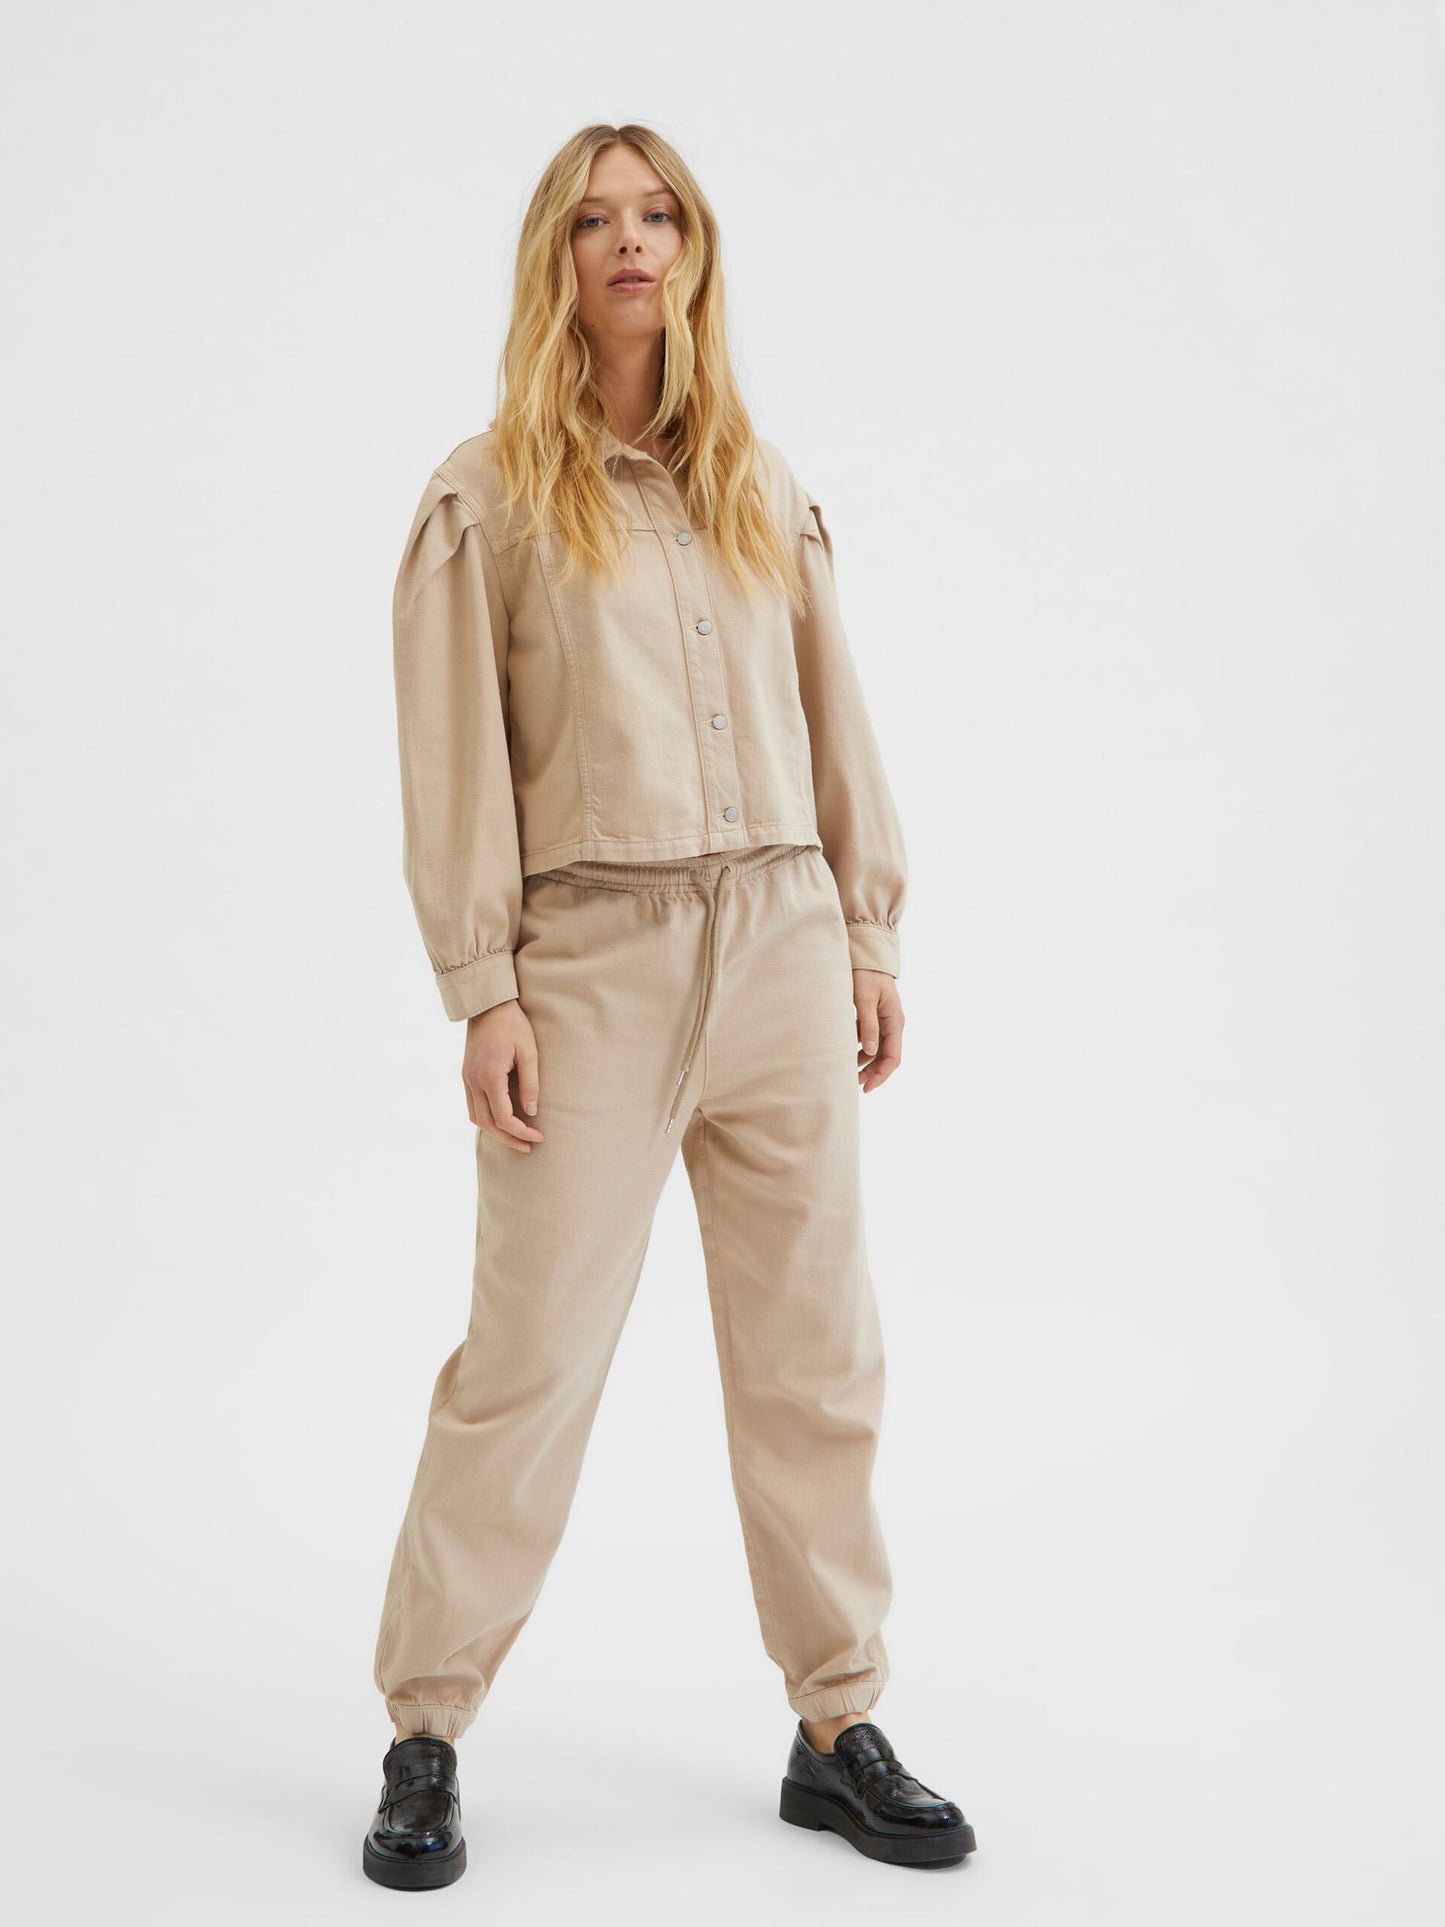 Nomad Denim Trousers - Selected Femme